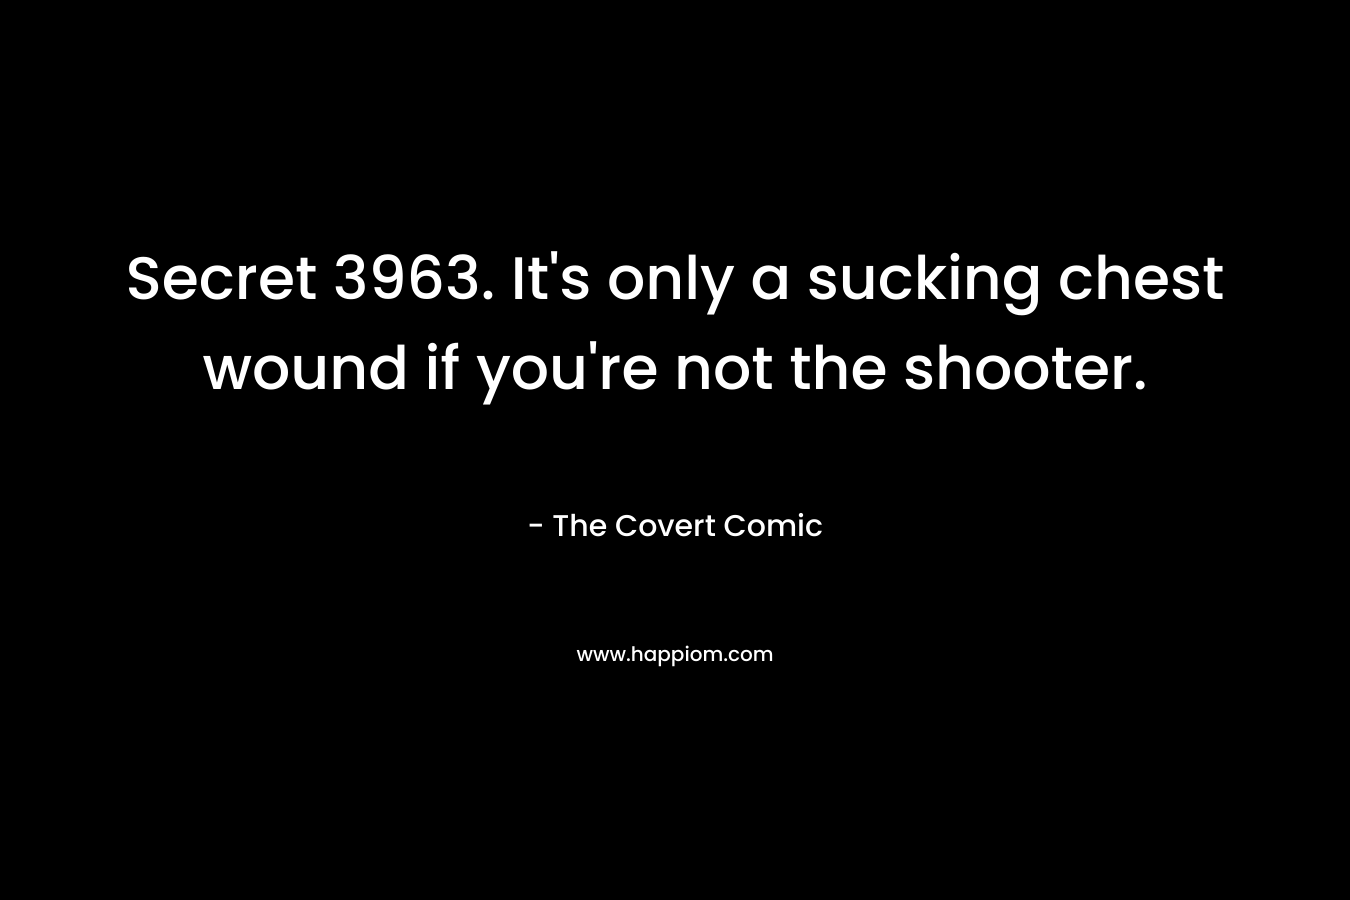 Secret 3963. It’s only a sucking chest wound if you’re not the shooter. – The Covert Comic